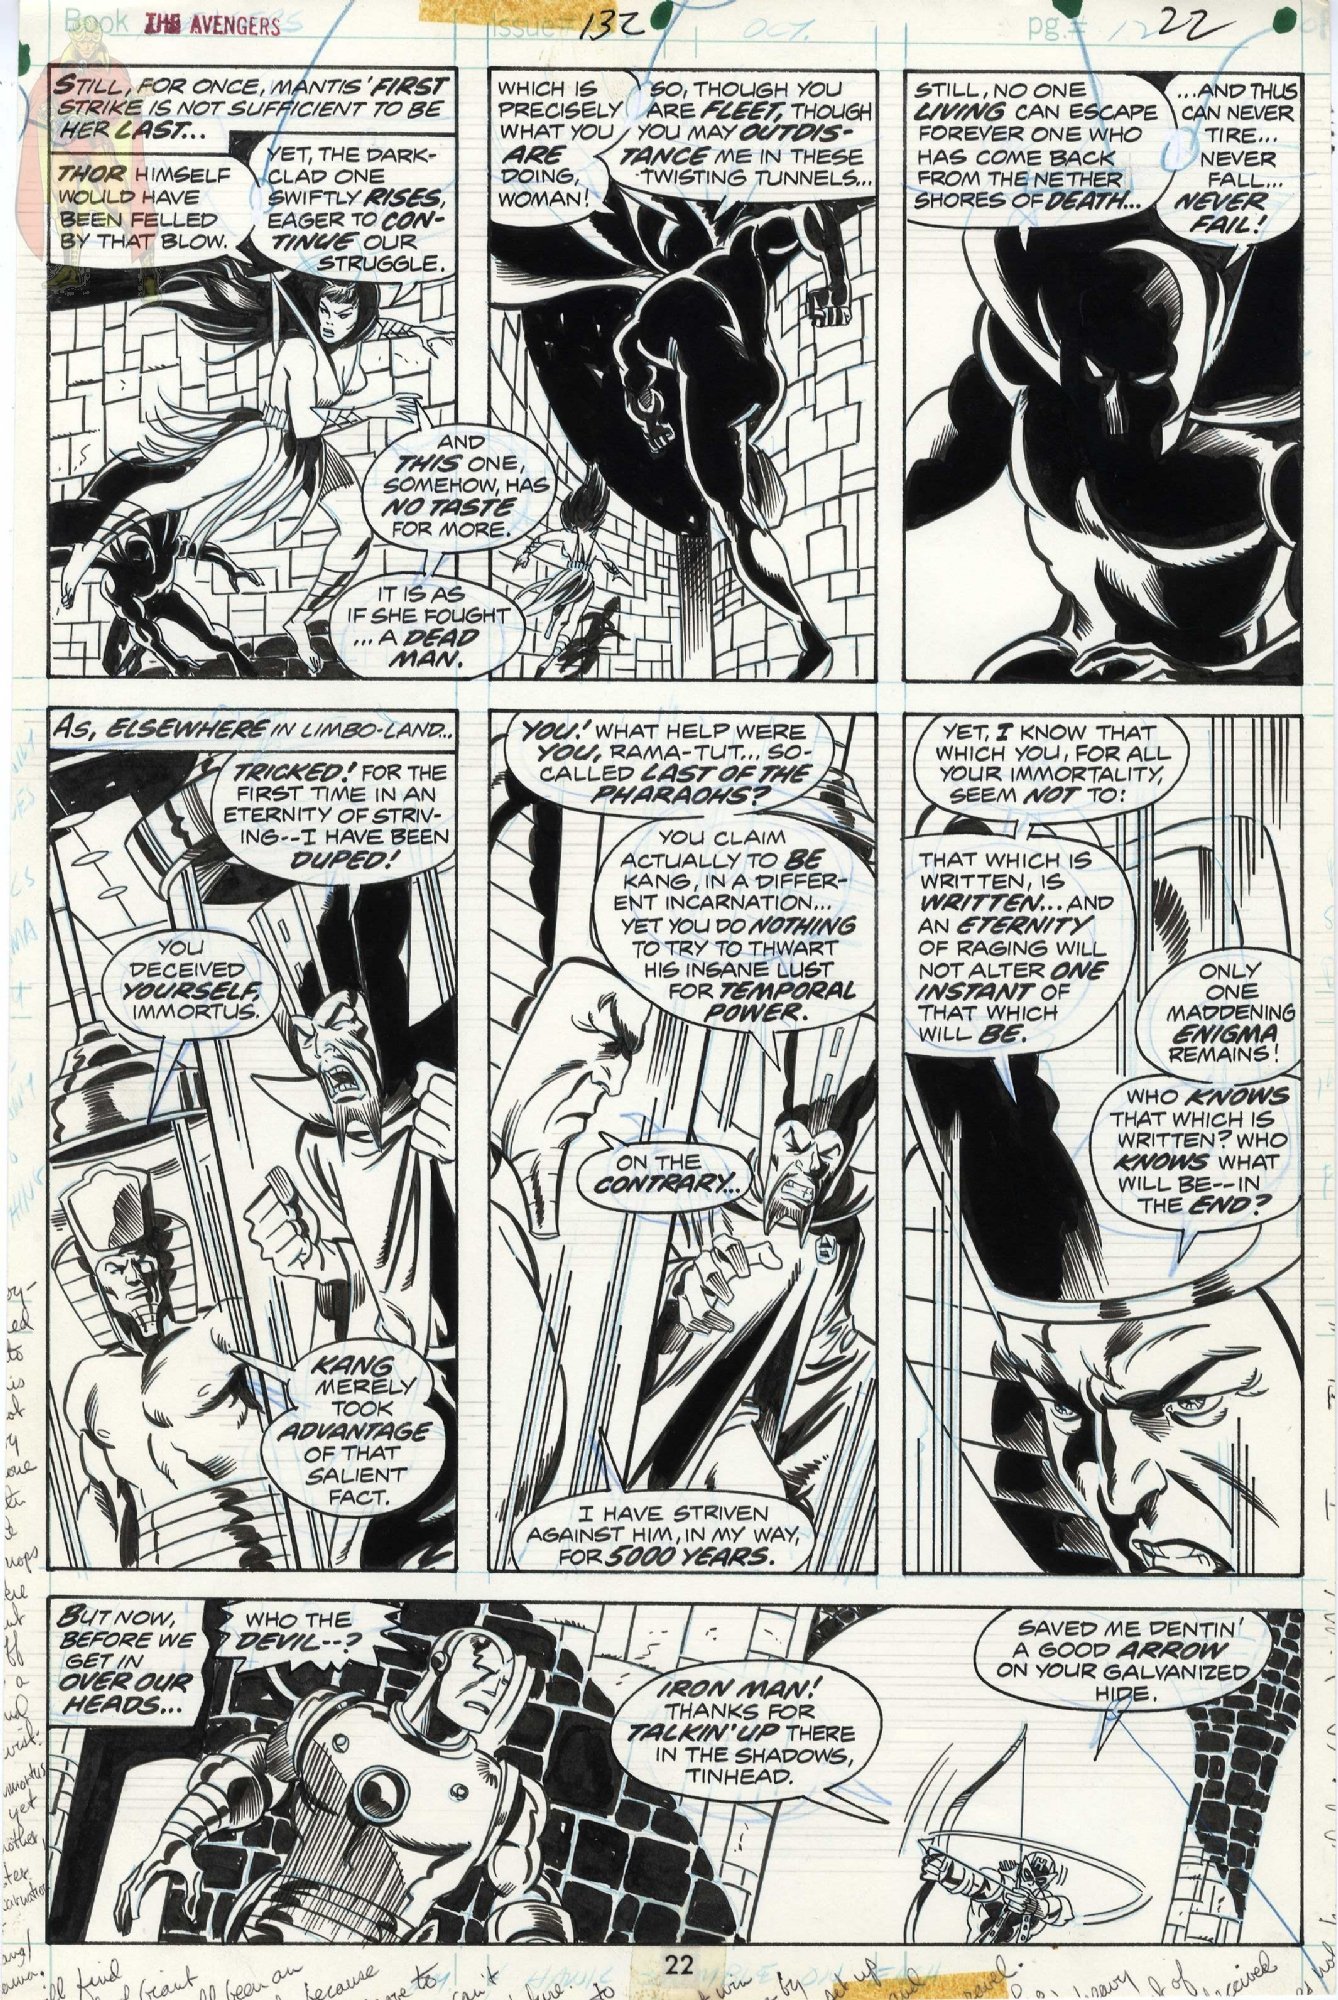 Avengers 132 page 22 by Sal Buscema and Joe Staton (1975), in Kirk Dilbeck  (3-Wishes and Patron-of-art) 's Avengers Assemble! Covers and interiors  Comic Art Gallery Room